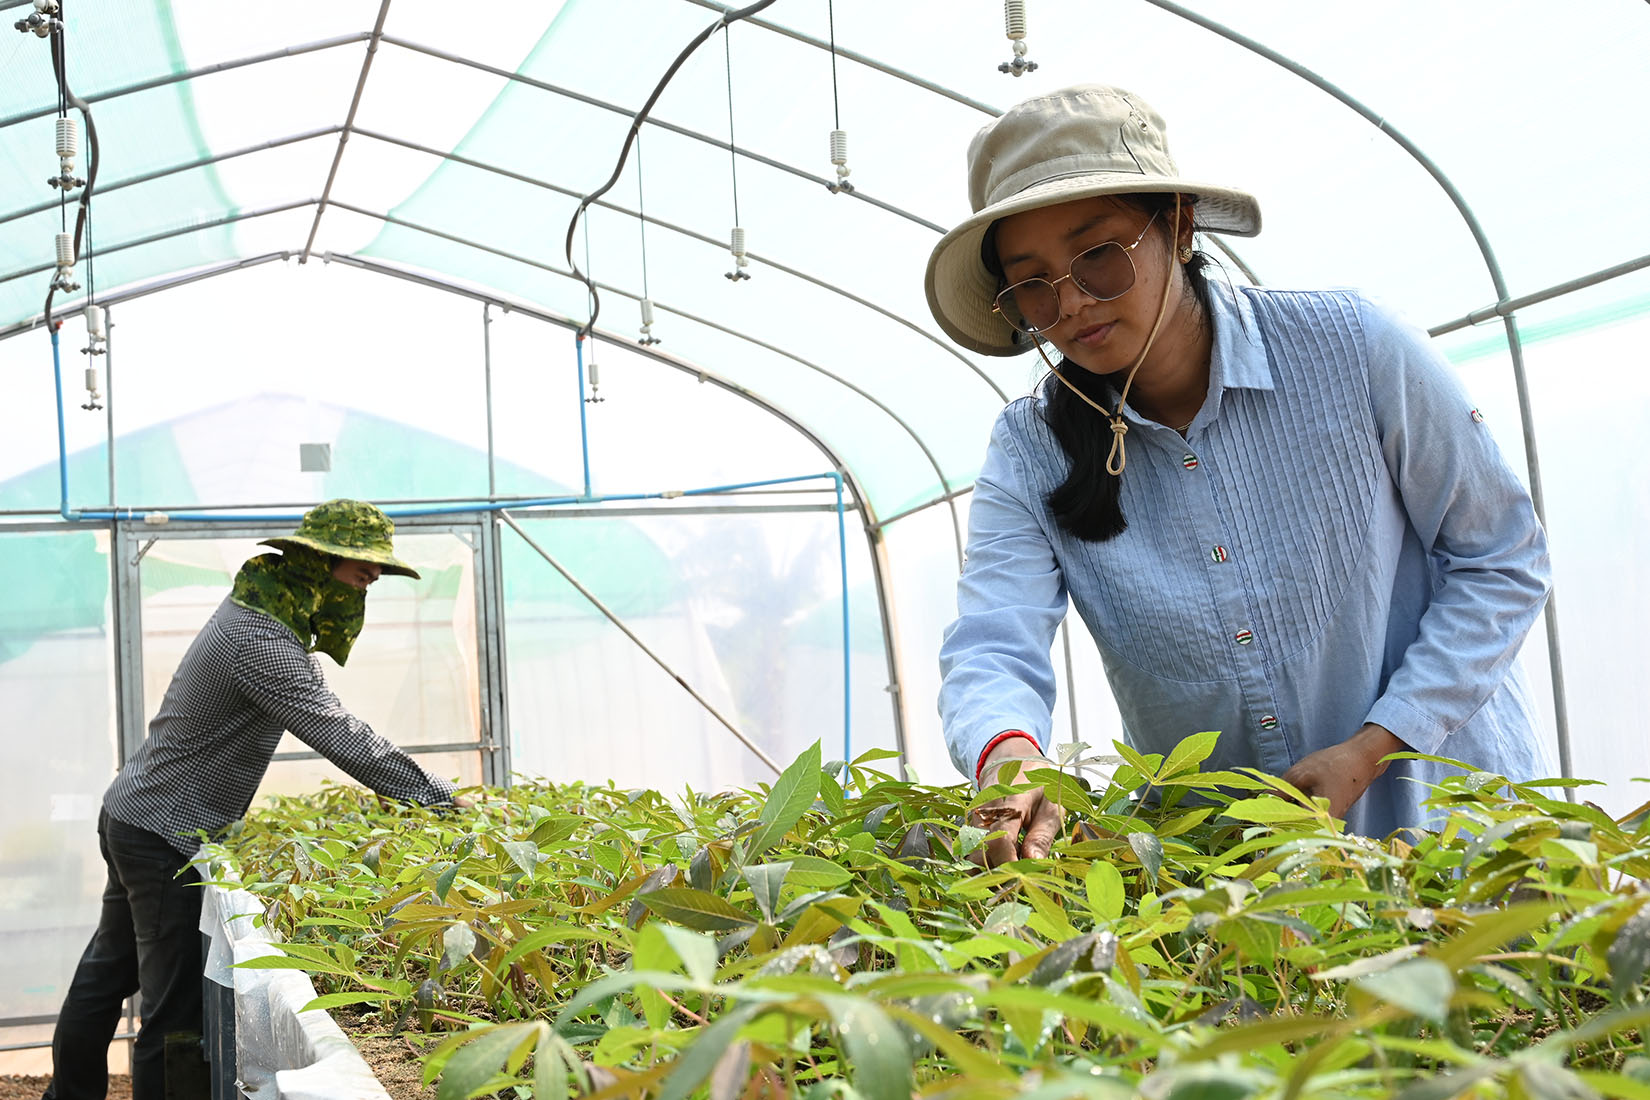 A woman in a hat inspecting seedlings in a protected nursery.